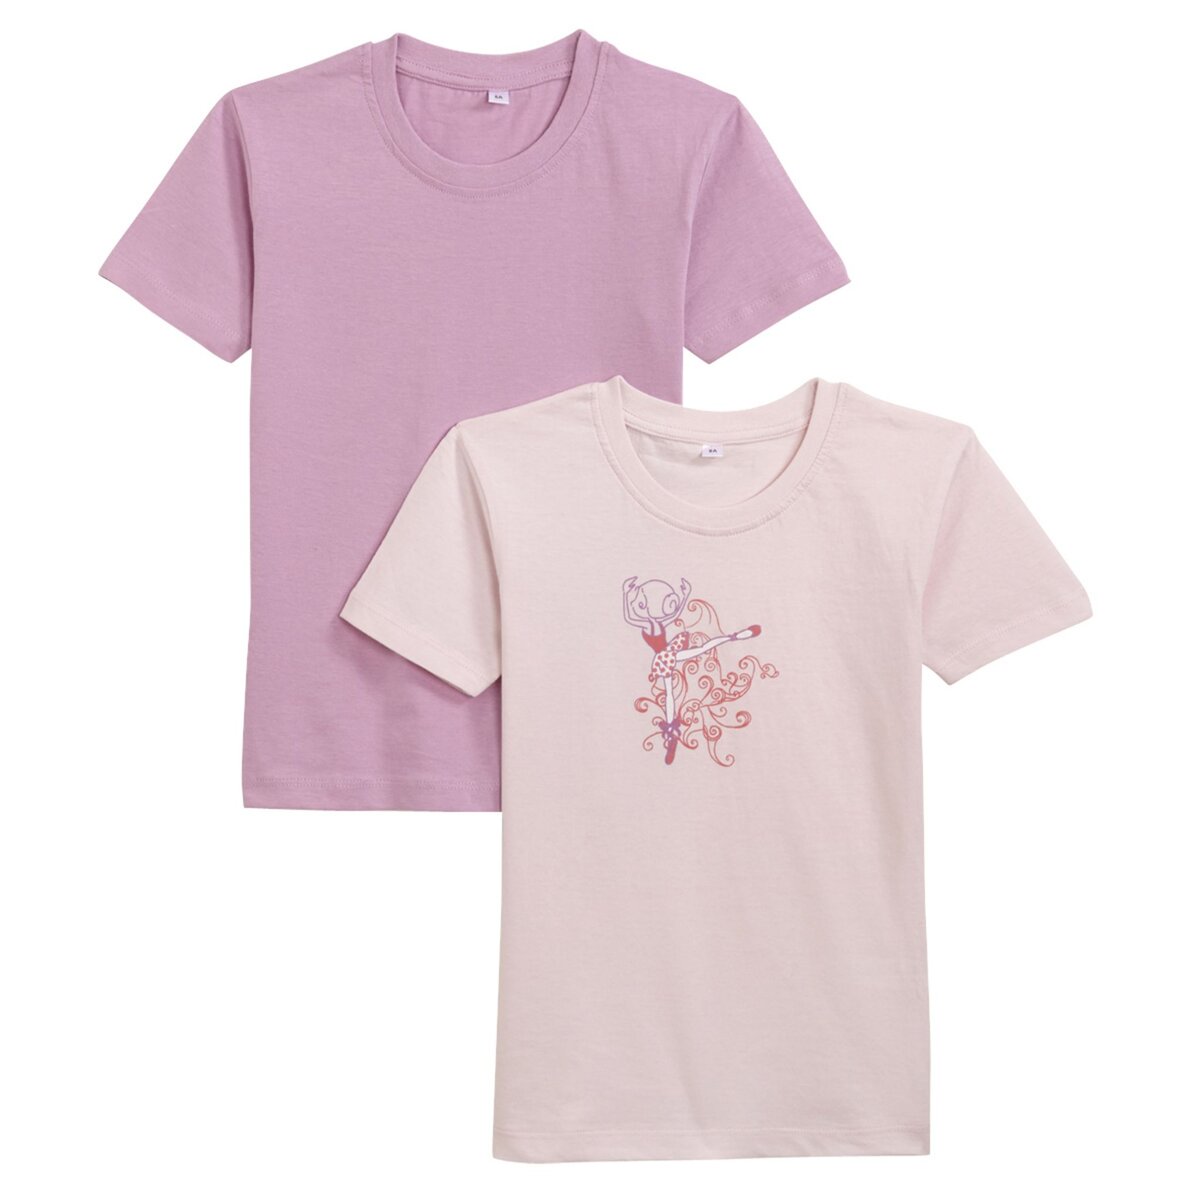 IN EXTENSO Lot de 2 tee-shirts fille